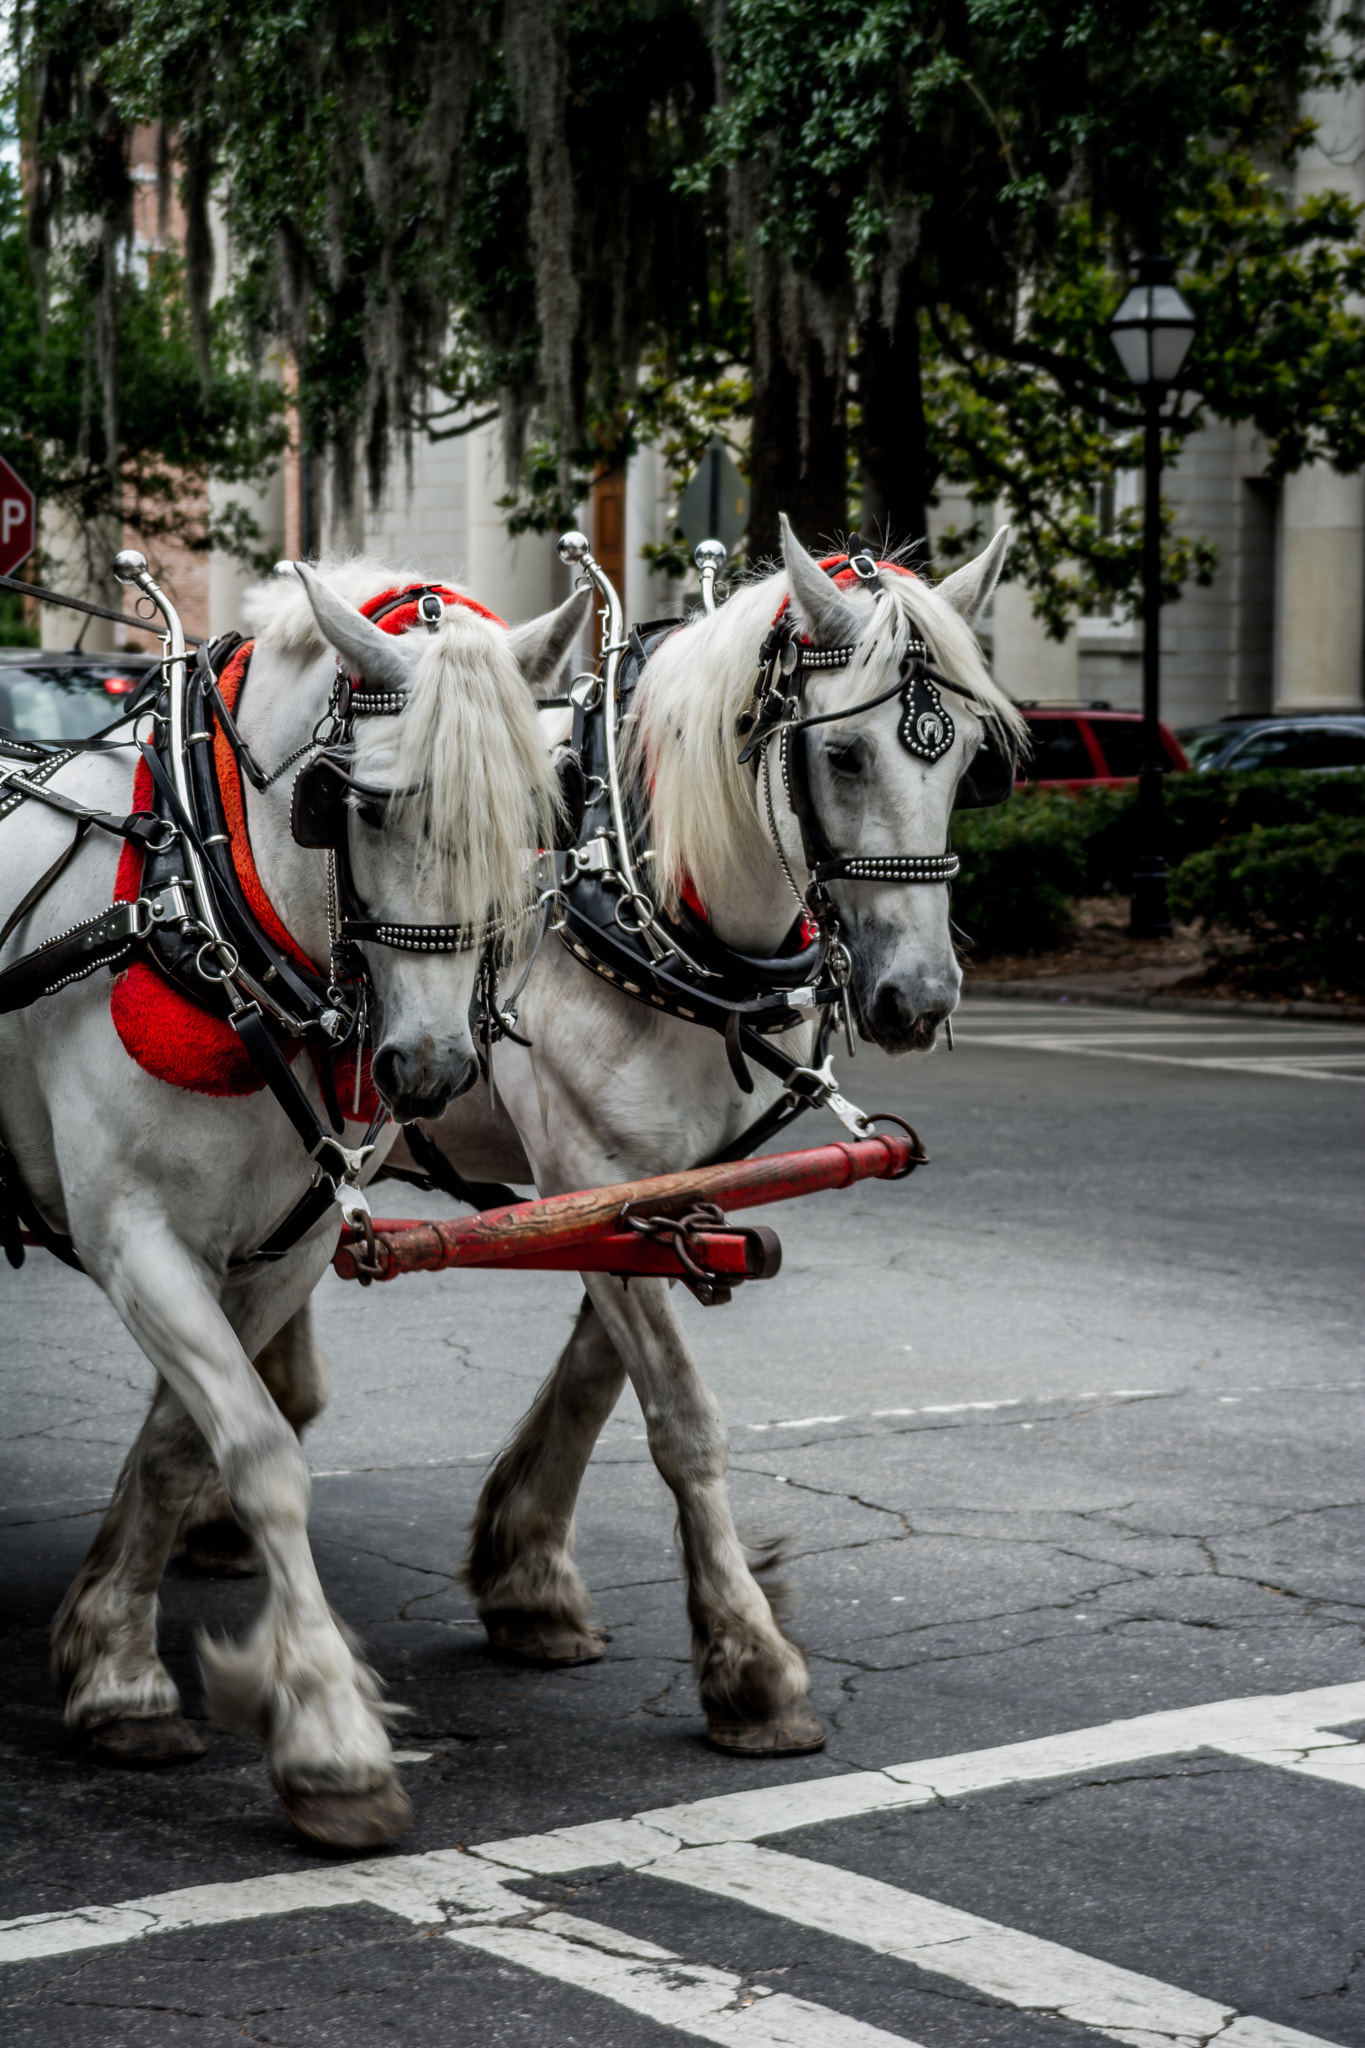 Nikon D7100 + Sigma 28-200mm F3.5-5.6 Compact Aspherical Hyperzoom Macro sample photo. Horse drawn carriage photography